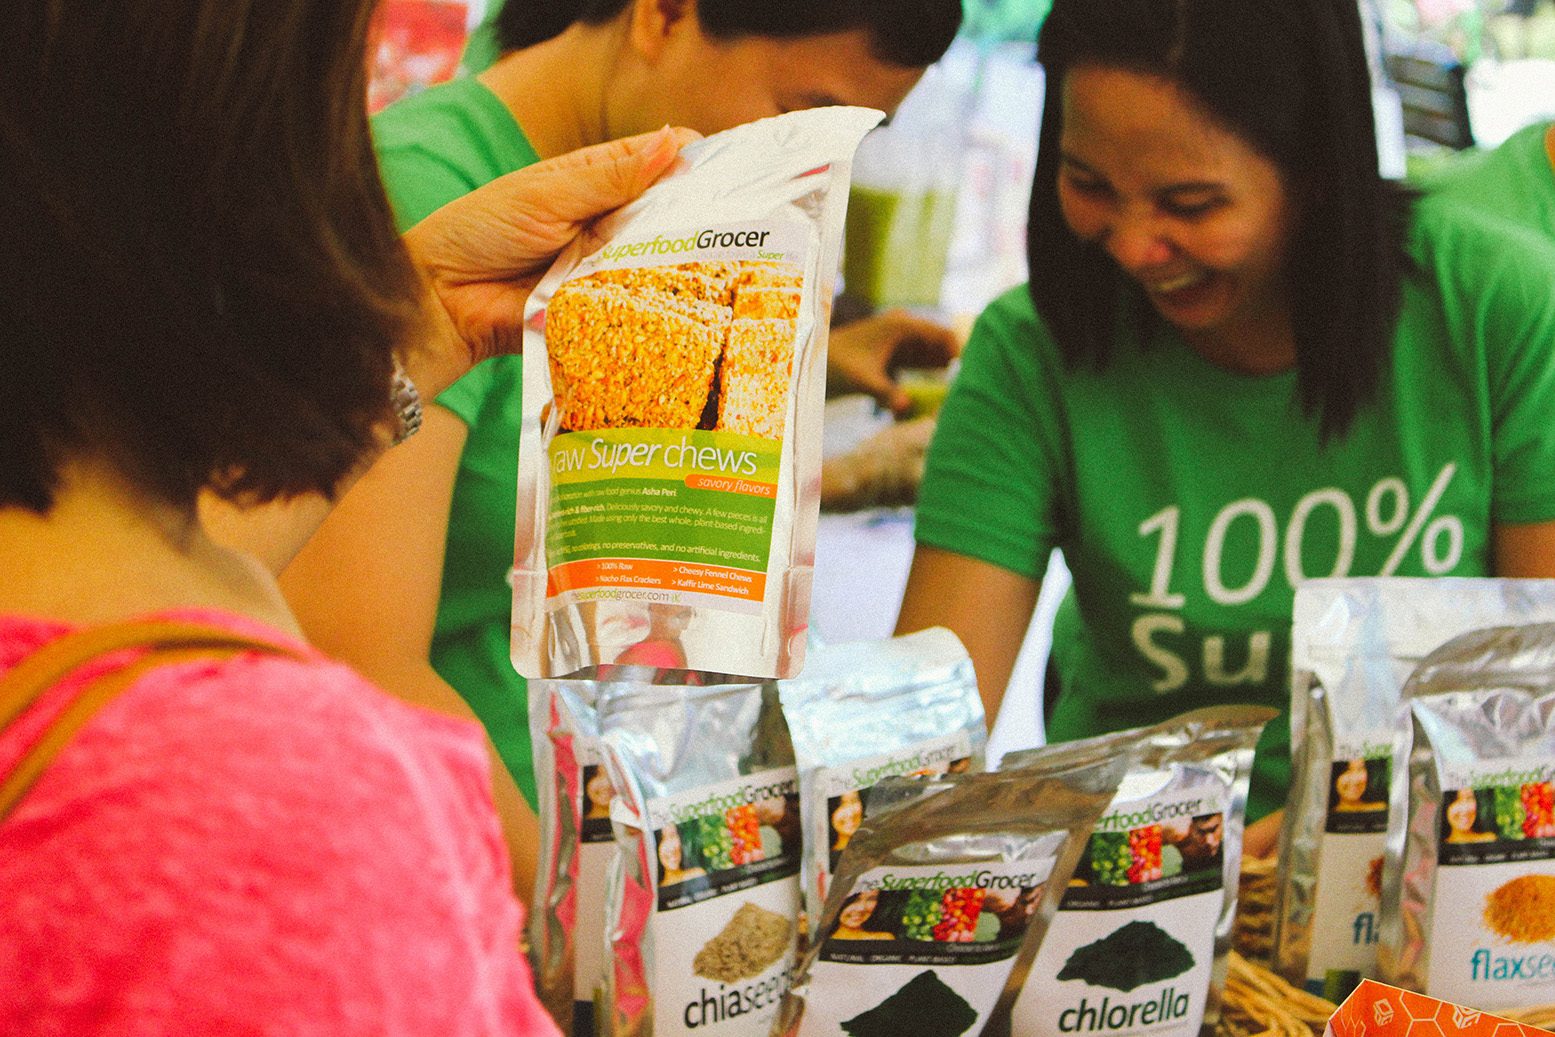 HELPING PEOPLE. “When we started The Superfood Grocer, setting up a business was interestingly not our primary objective. Rather, we saw a genuine need that was close to us and we passionately wanted to address this and reach (and hopefully help) as many people as we can,” Carmela Cancio says  